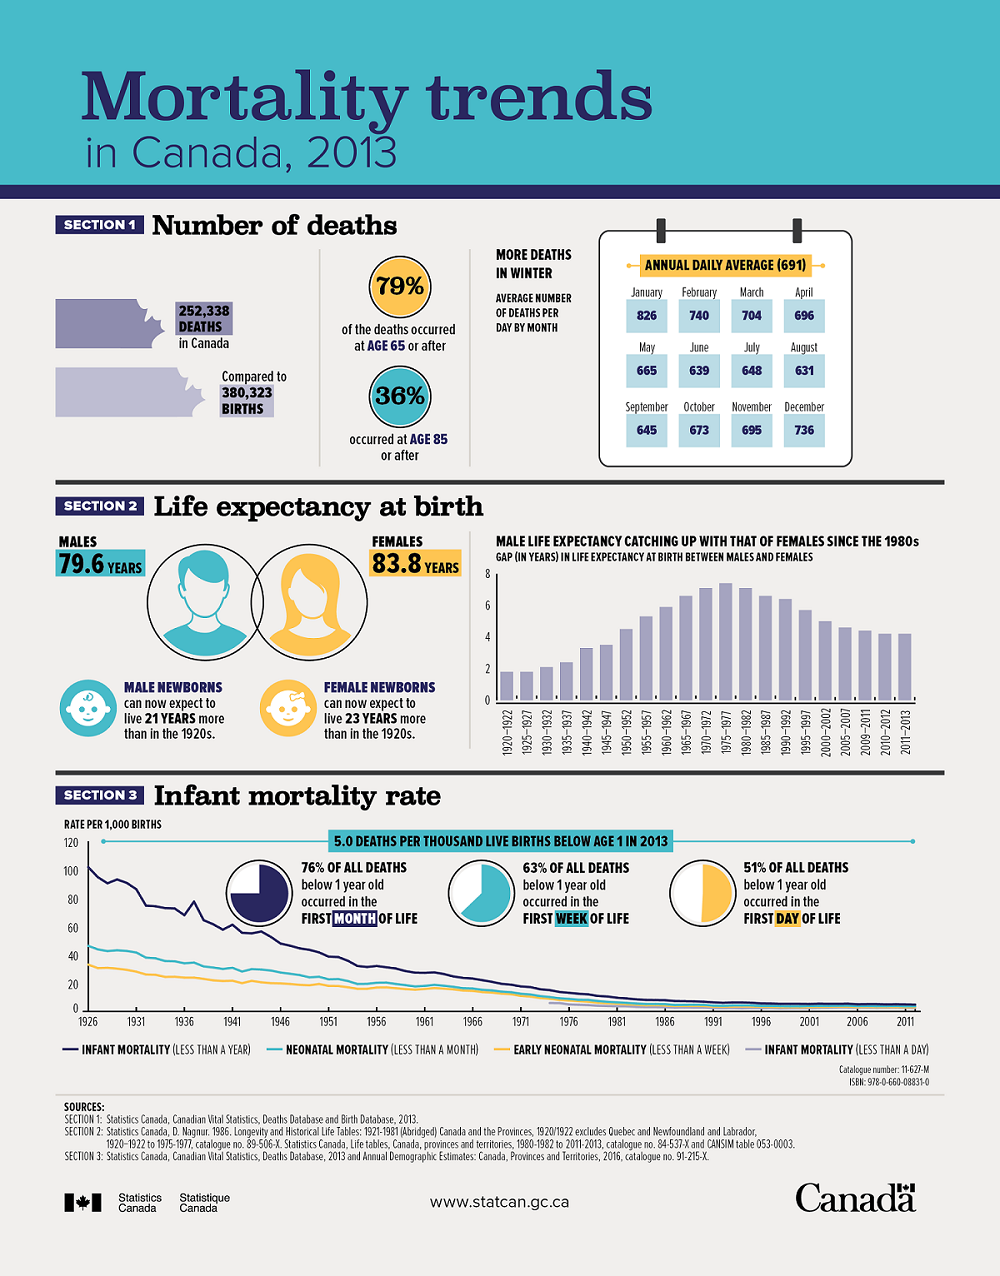 Thumbnail for Infographic 1: Mortality trends in Canada, 2013